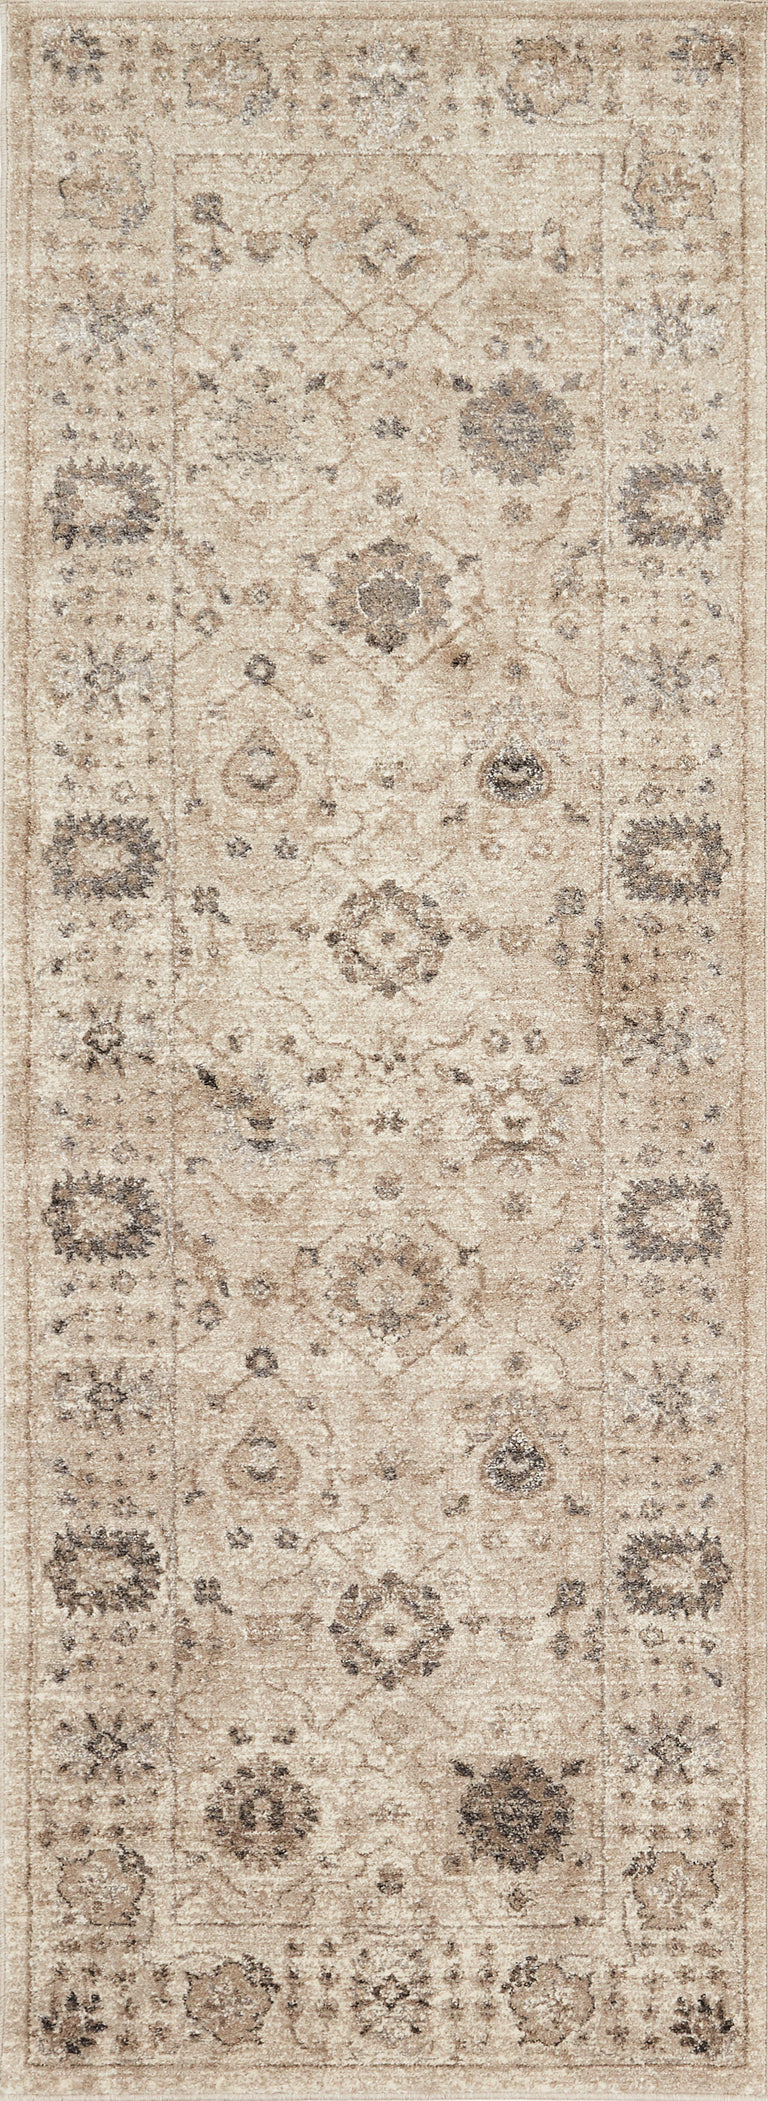 Loloi Rugs Century Collection Rug in Taupe, Taupe - 9'6" x 13'